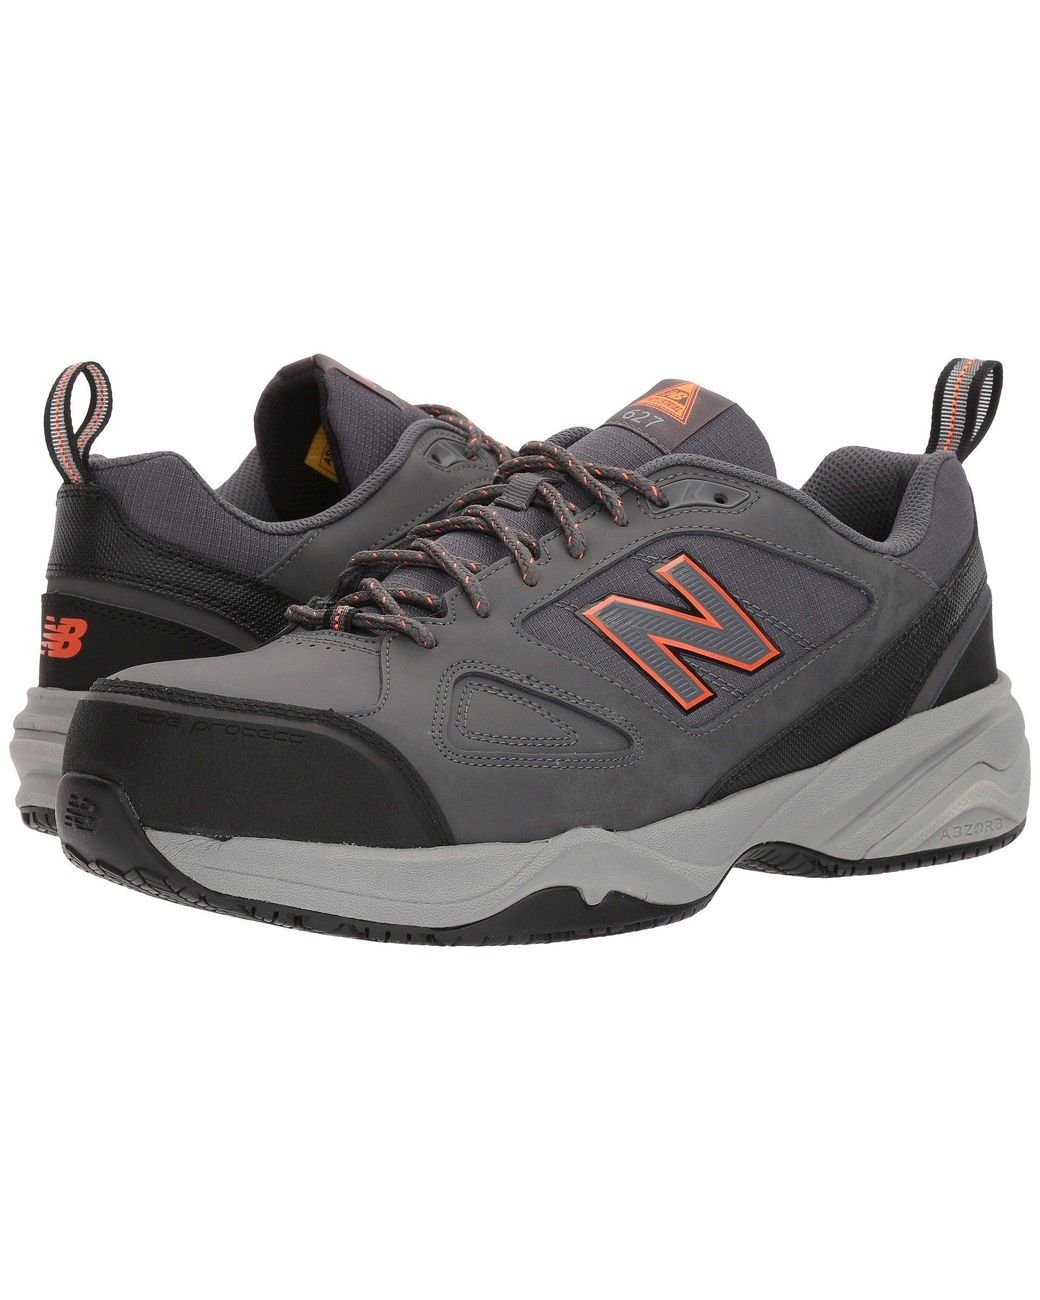 New Balance Leather 627v2 in Gray for Men - Lyst